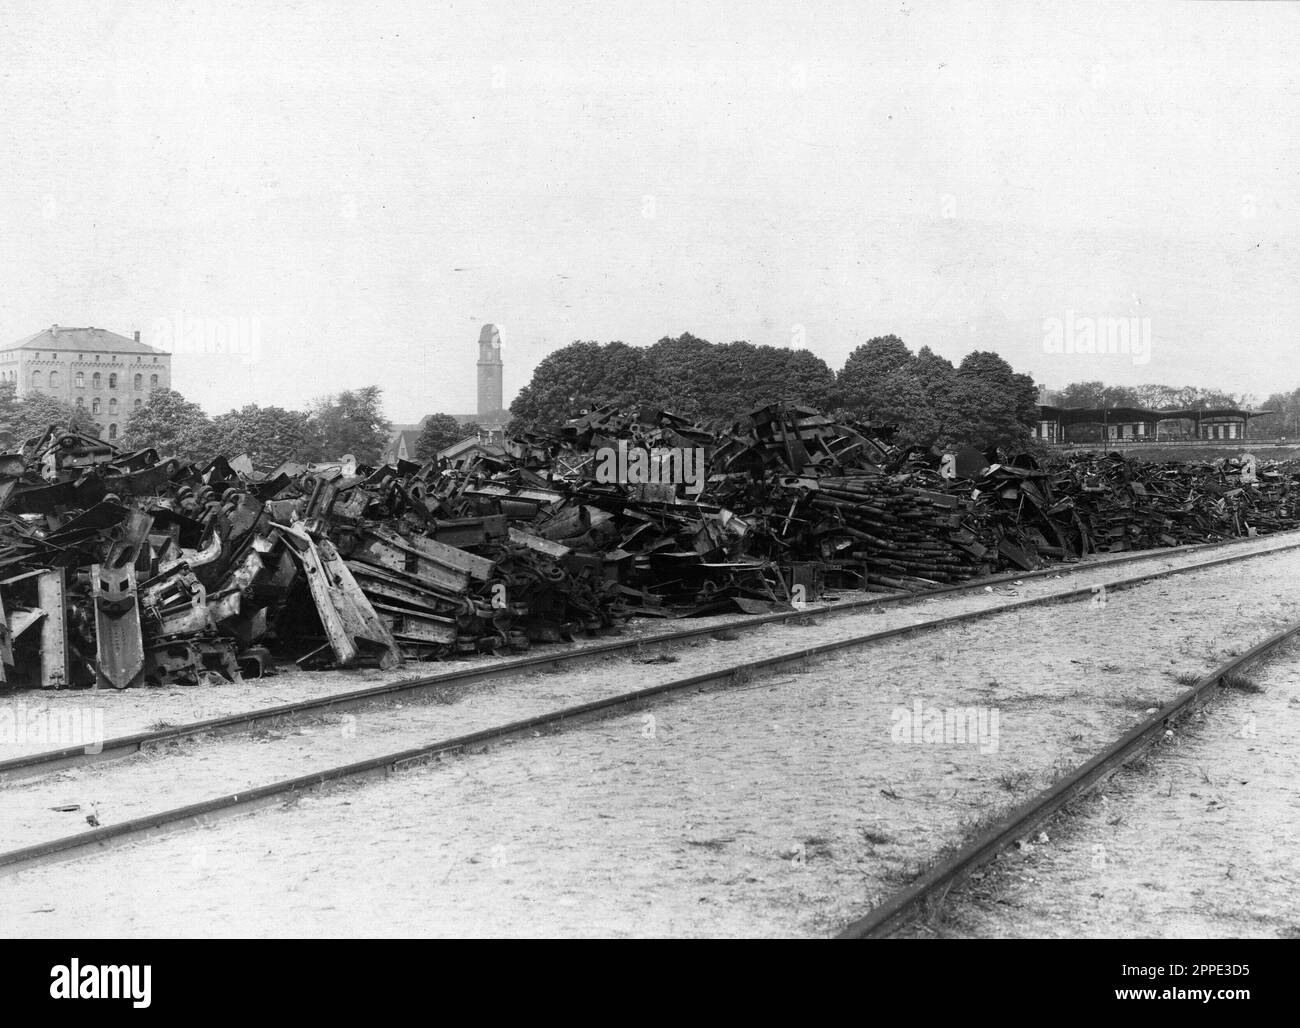 Destruction of German munitions and artillery in 1919 during the Allied occupation of the Rhineland. After WW1 the Allies occupied the left bank of the Rhine for 11 years. Stock Photo